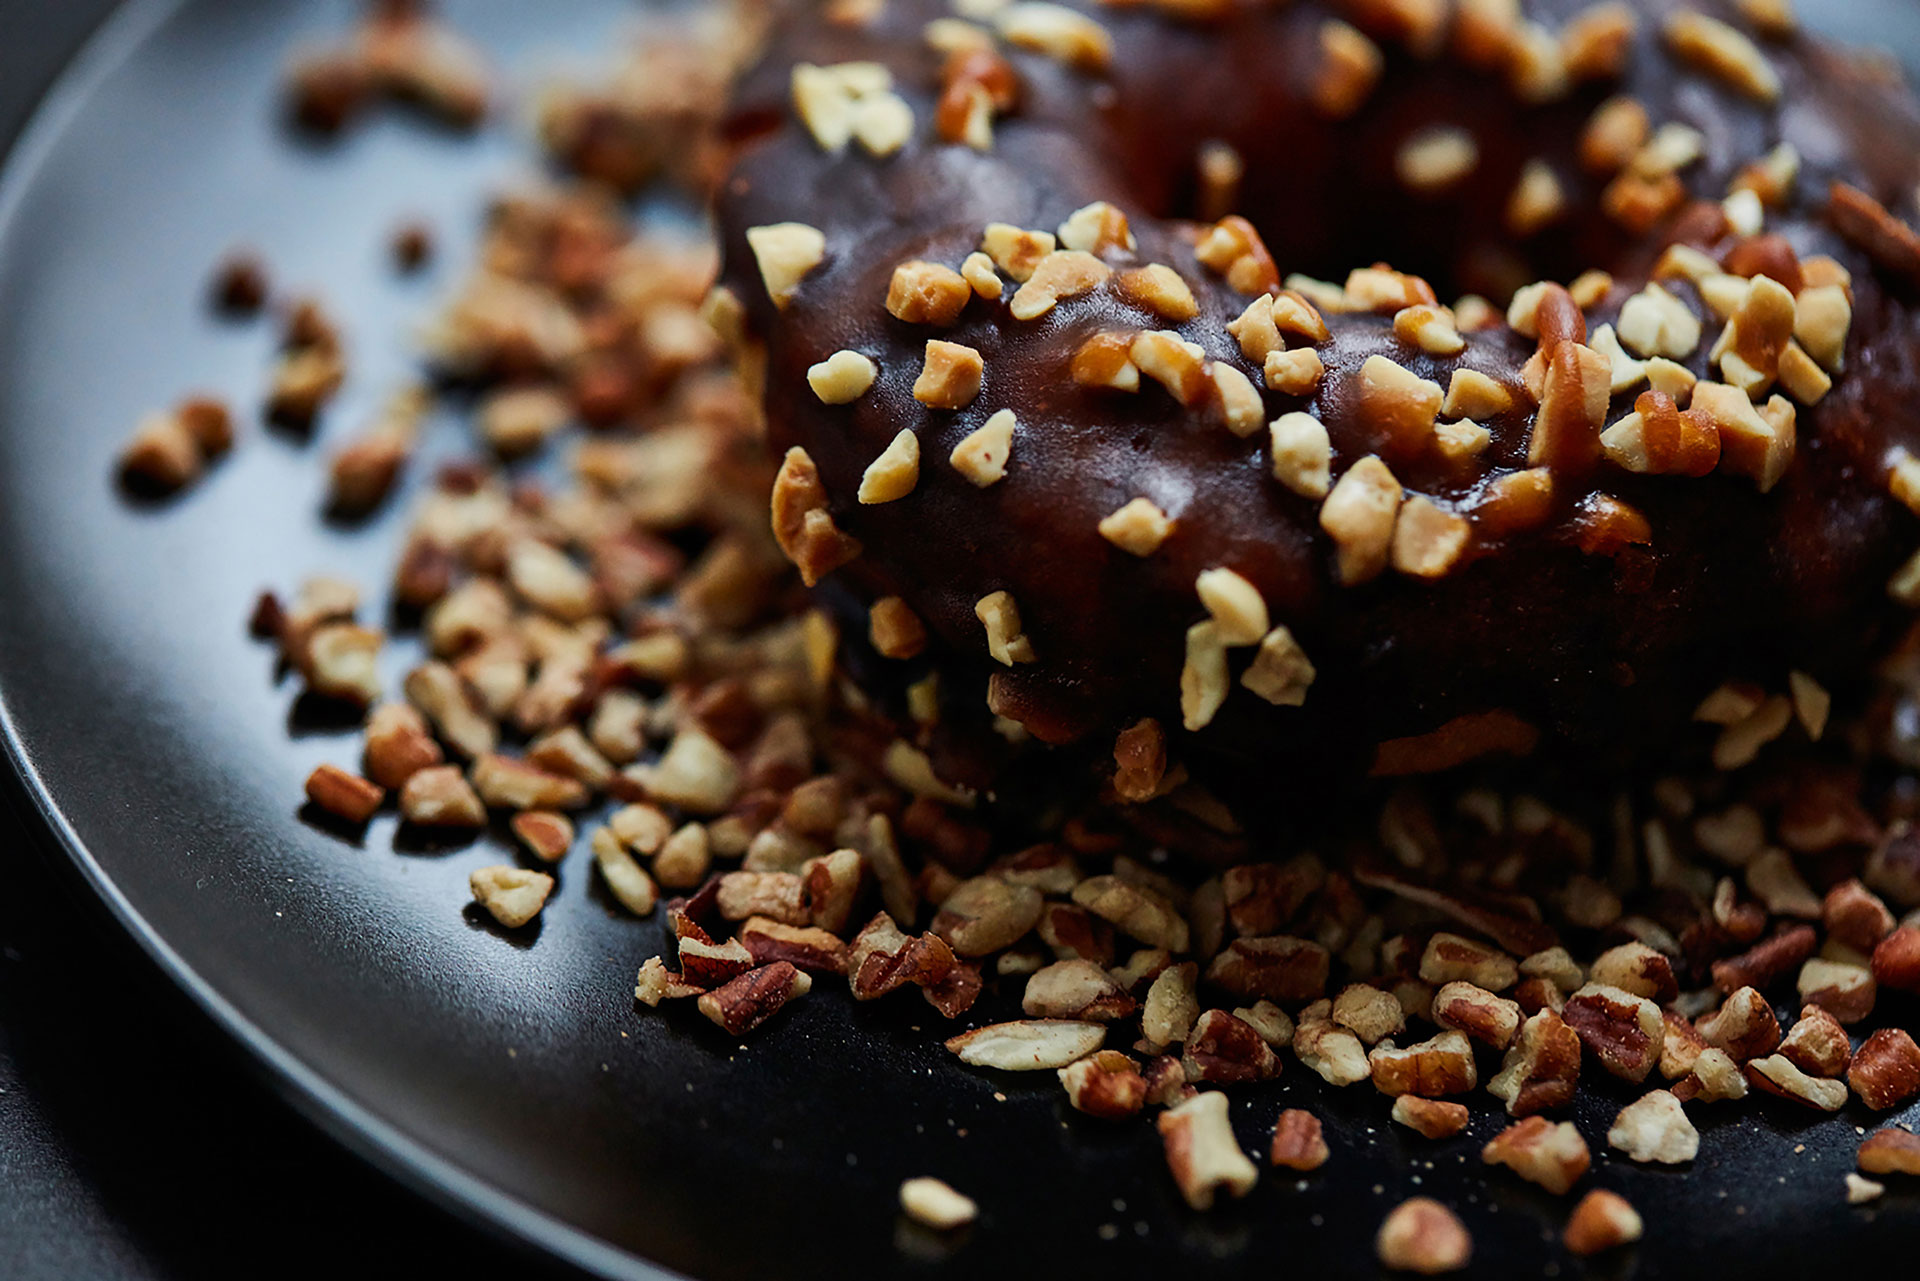 Chocolate donut sprinkled with nuts photographed by food and beverage photographer Kate Benson.